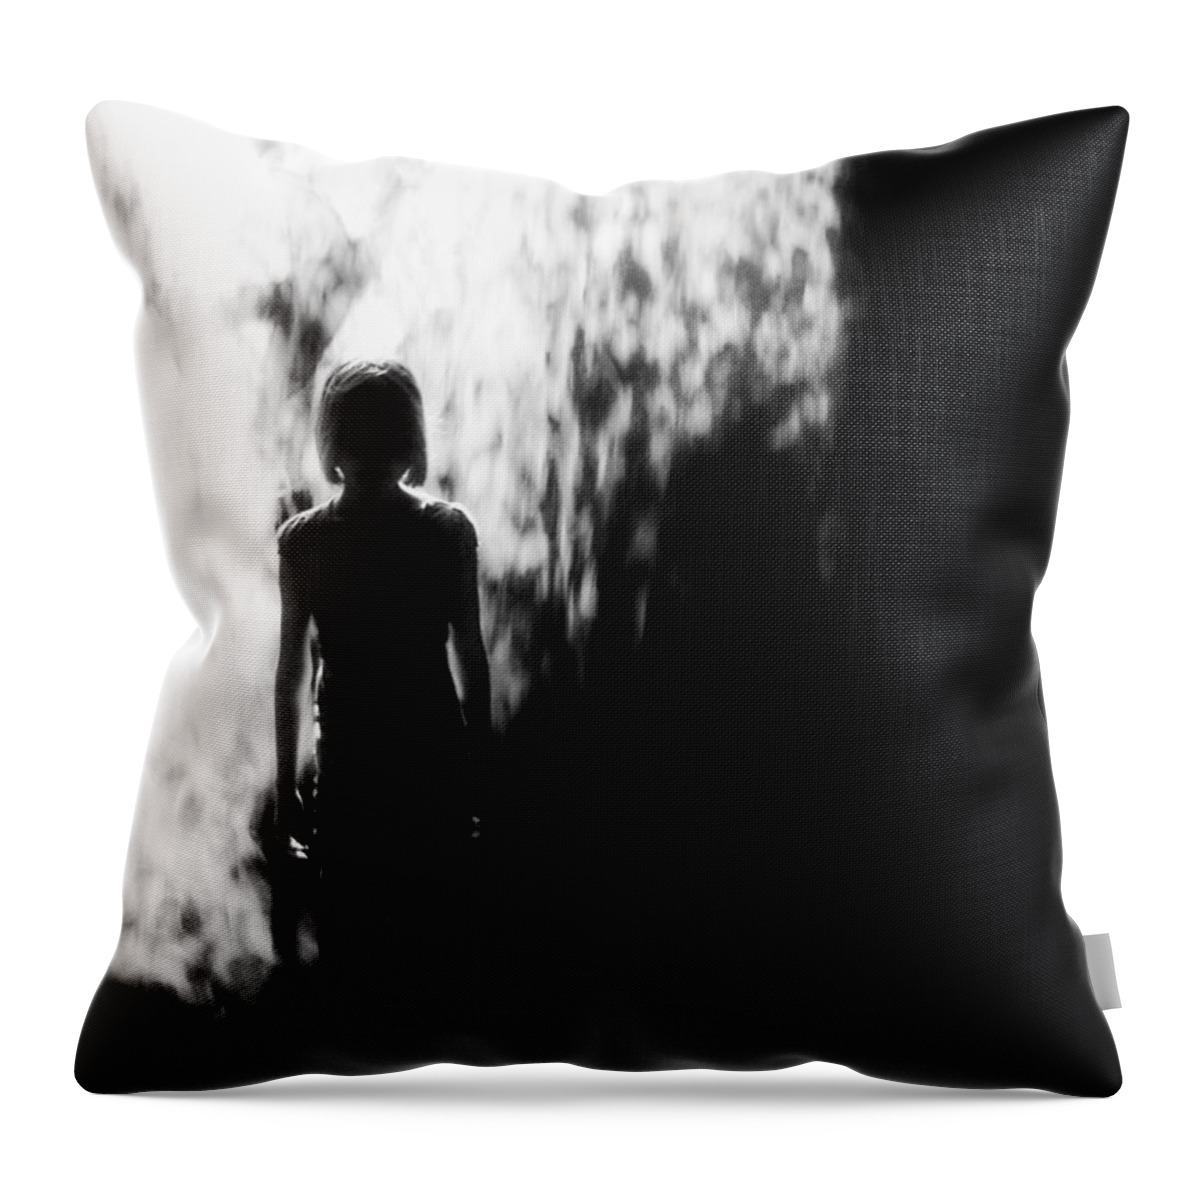 Dark Throw Pillow featuring the photograph In Darkness by Stoney Lawrentz